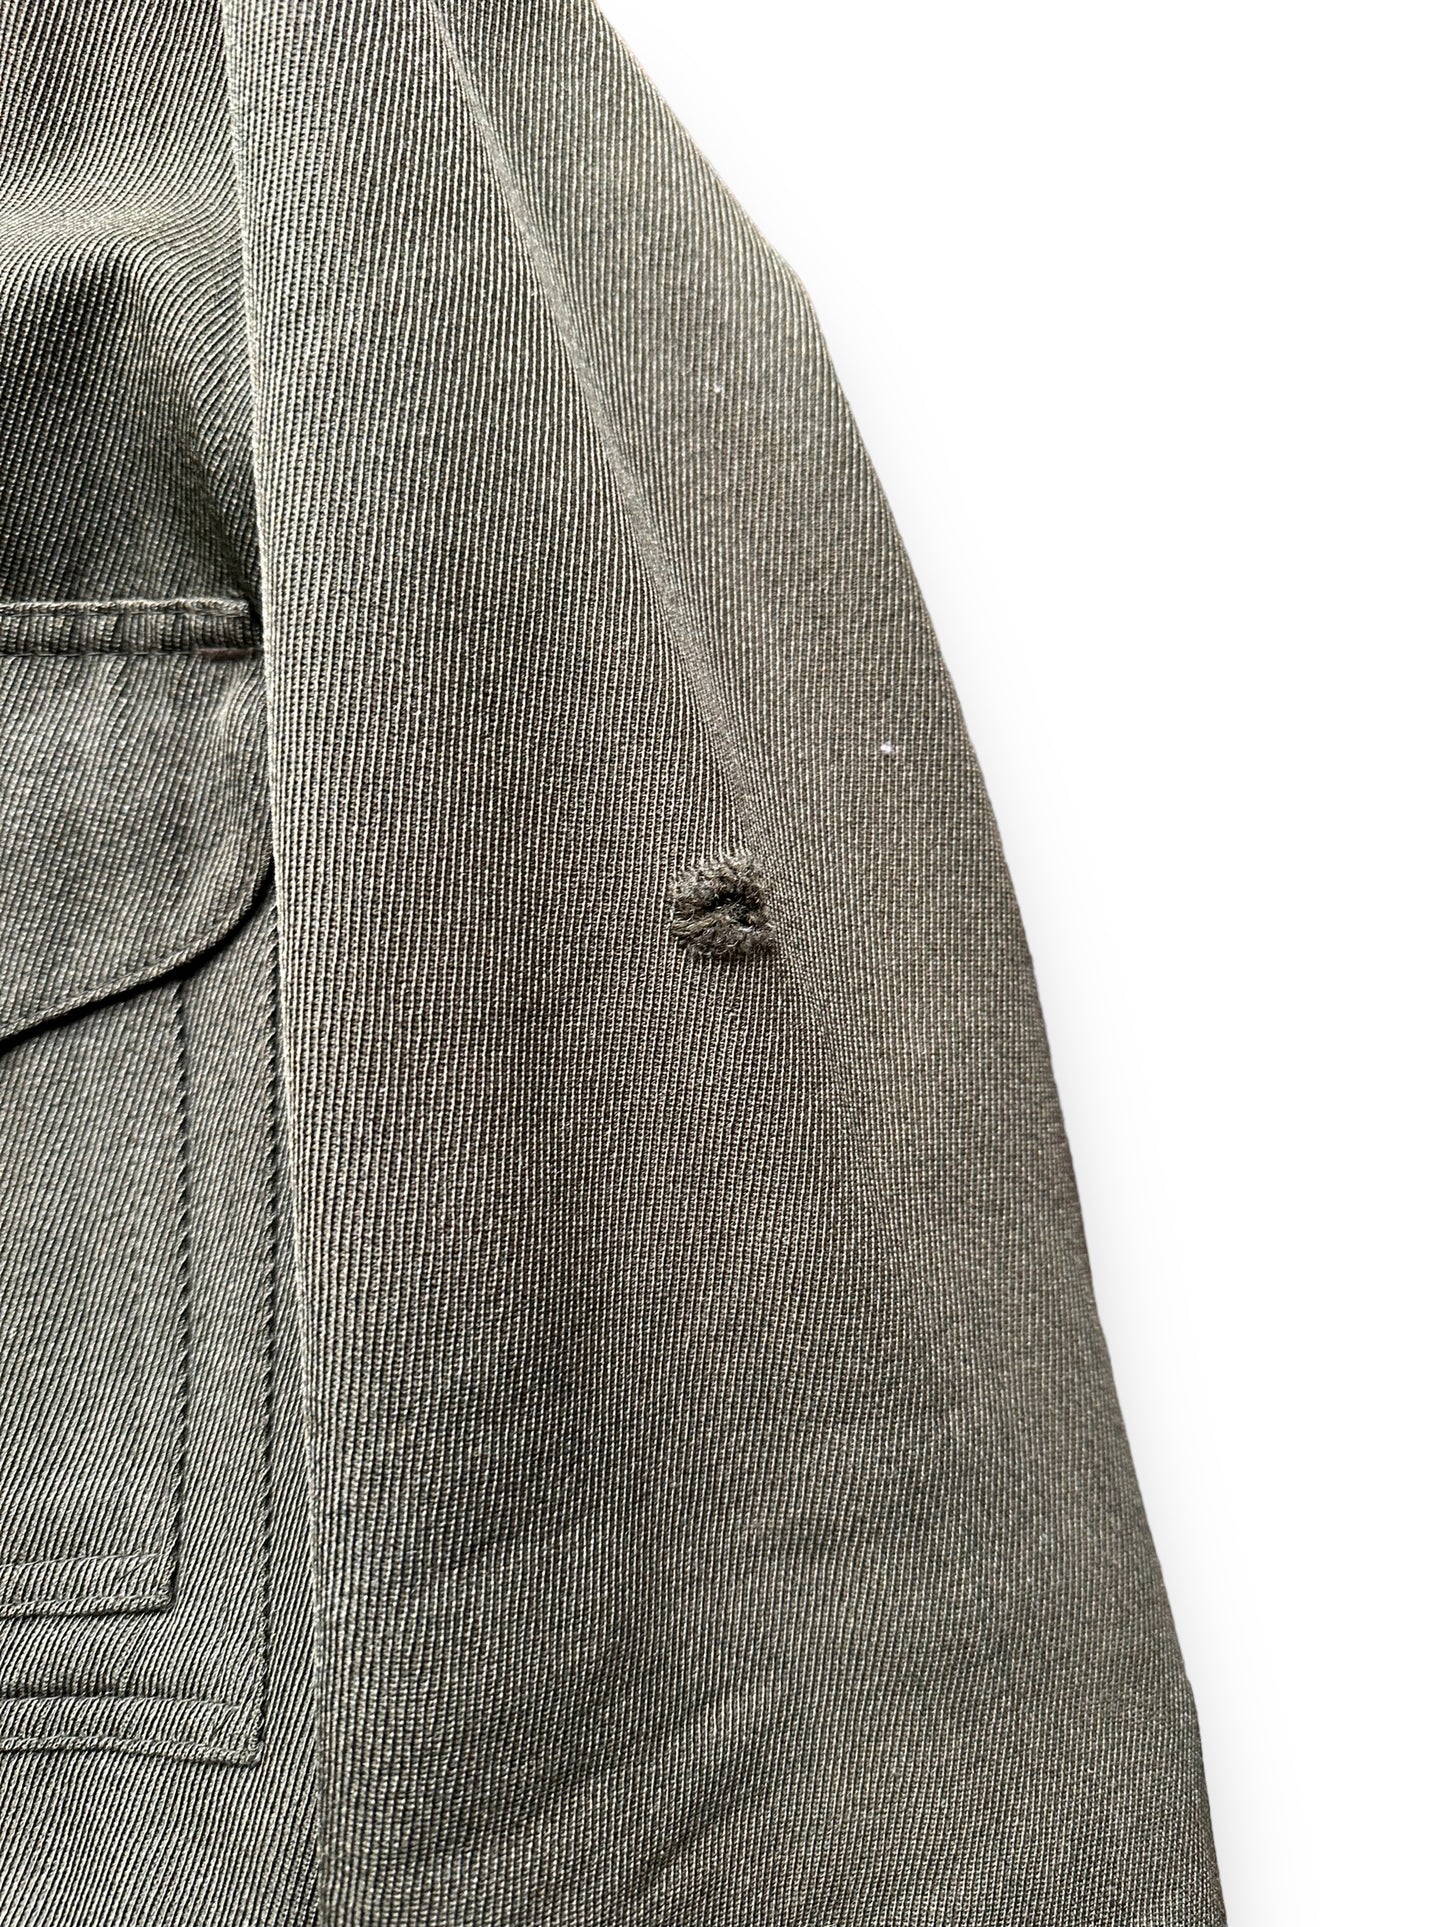 Small Hole in Left Arm of Vintage Filson Whipcord Cruiser SZ XL | Vintage Workwear Seattle | Vintage Filson Seattle